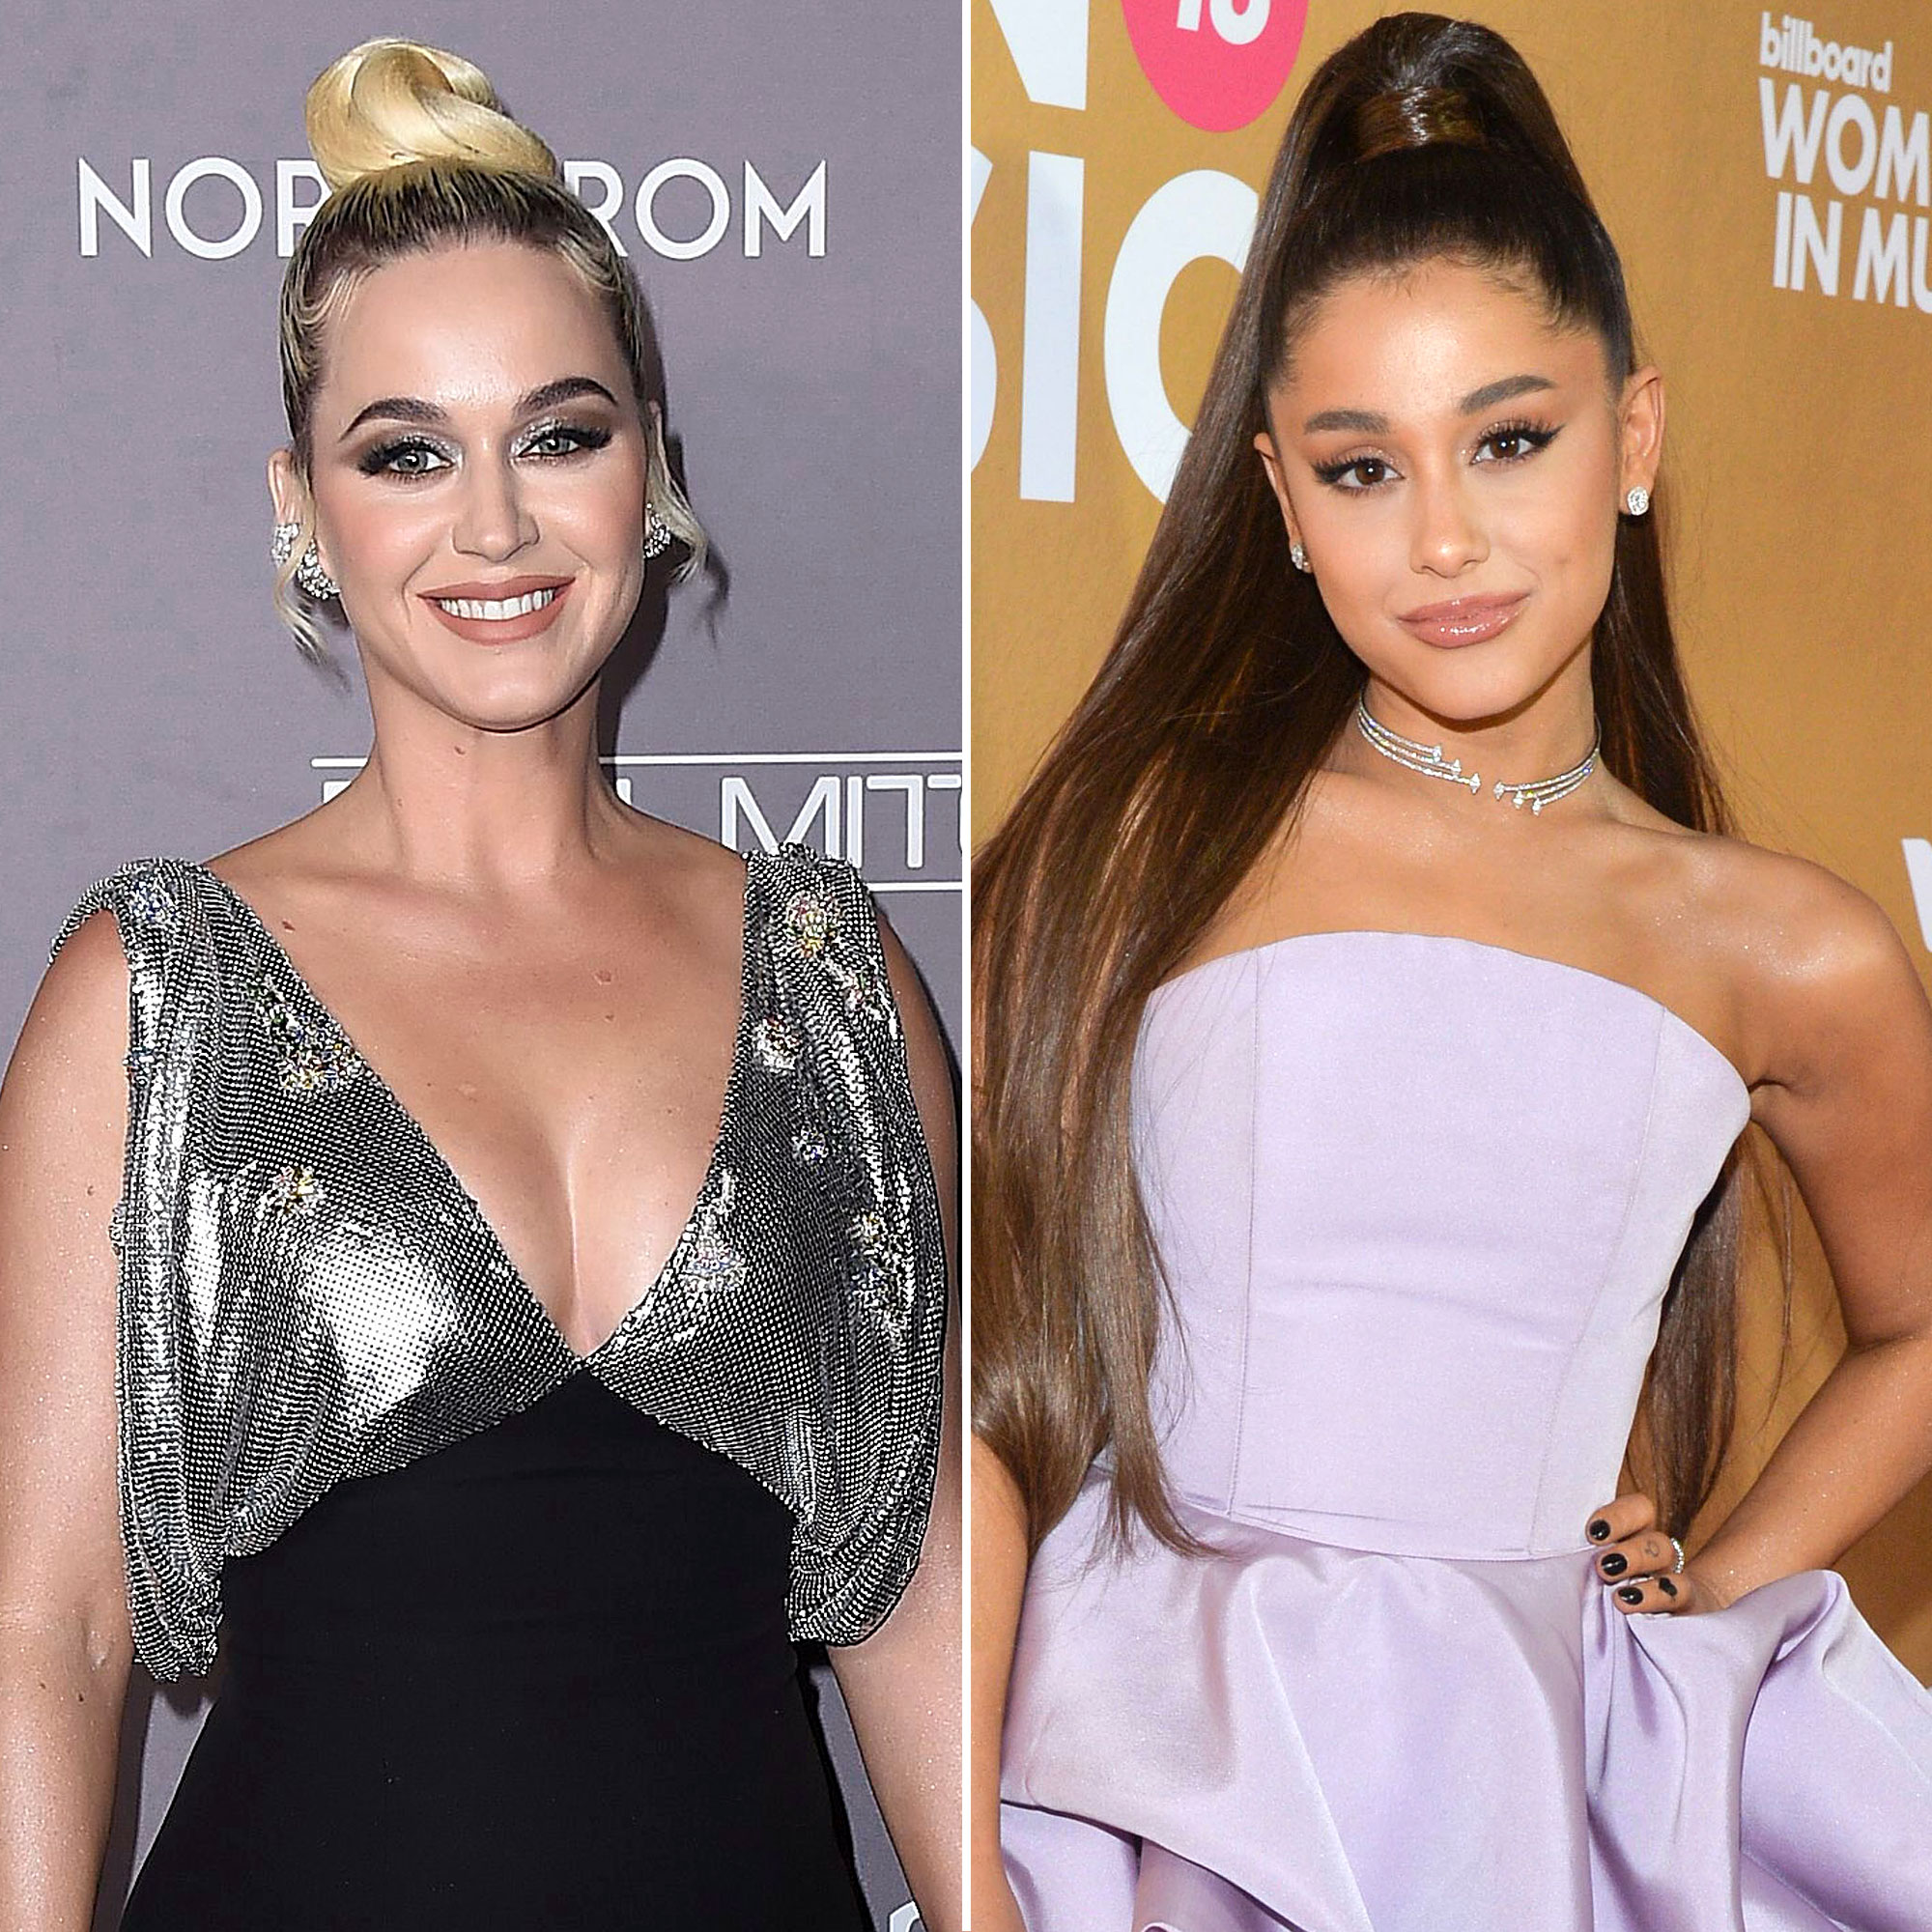 Katy Perry Celeb Porn - Katy Perry Shows Baby Gift From Ariana Grande for Daughter Daisy